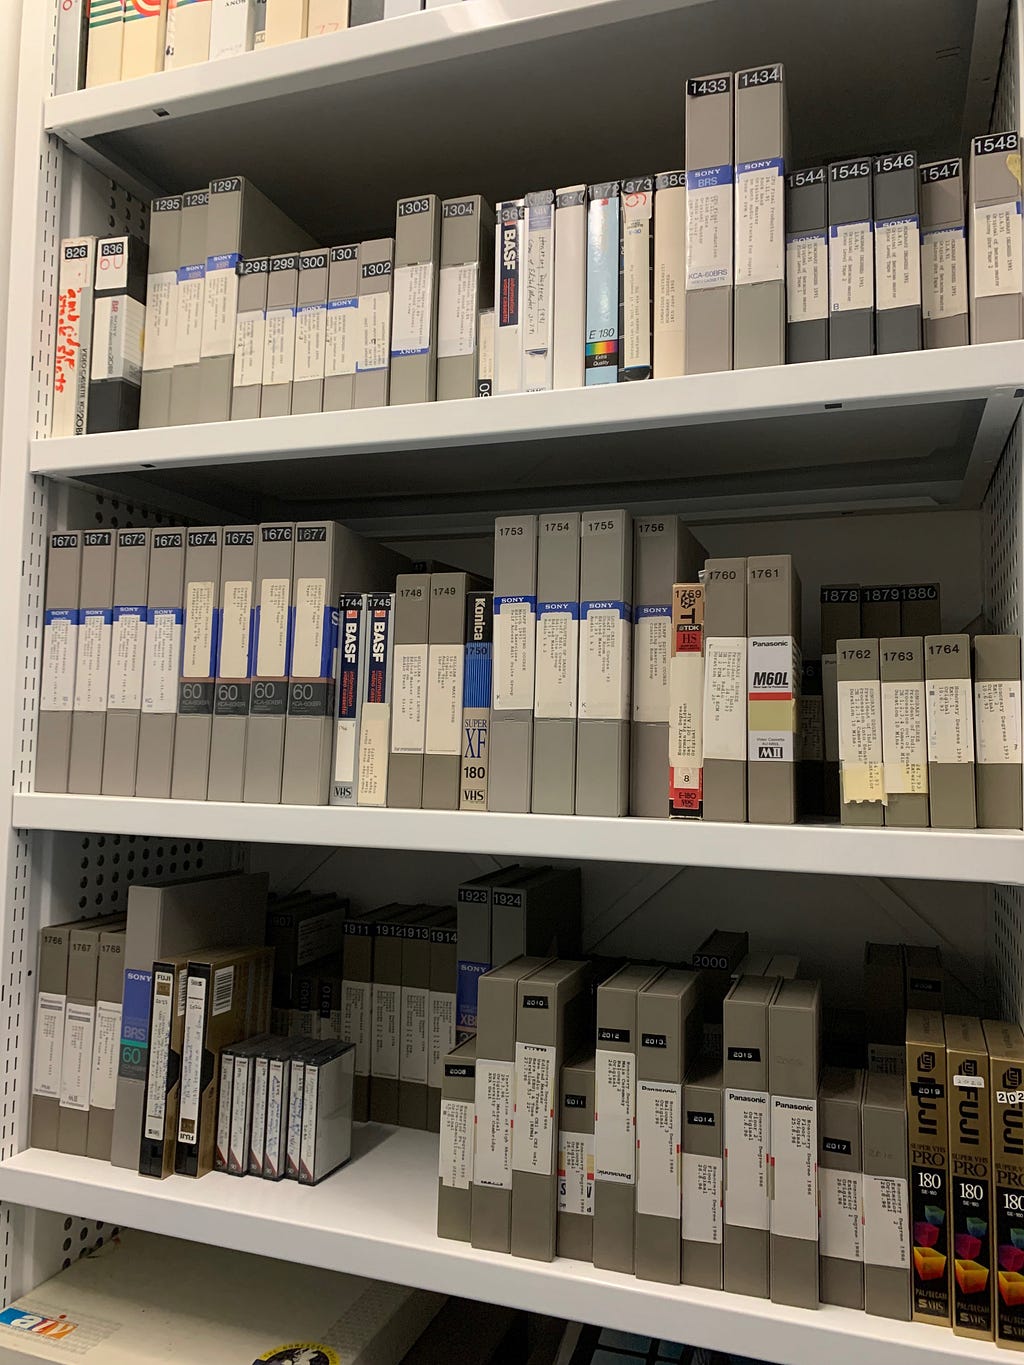 Shelves of videotapes and audiotapes in different sized boxes.